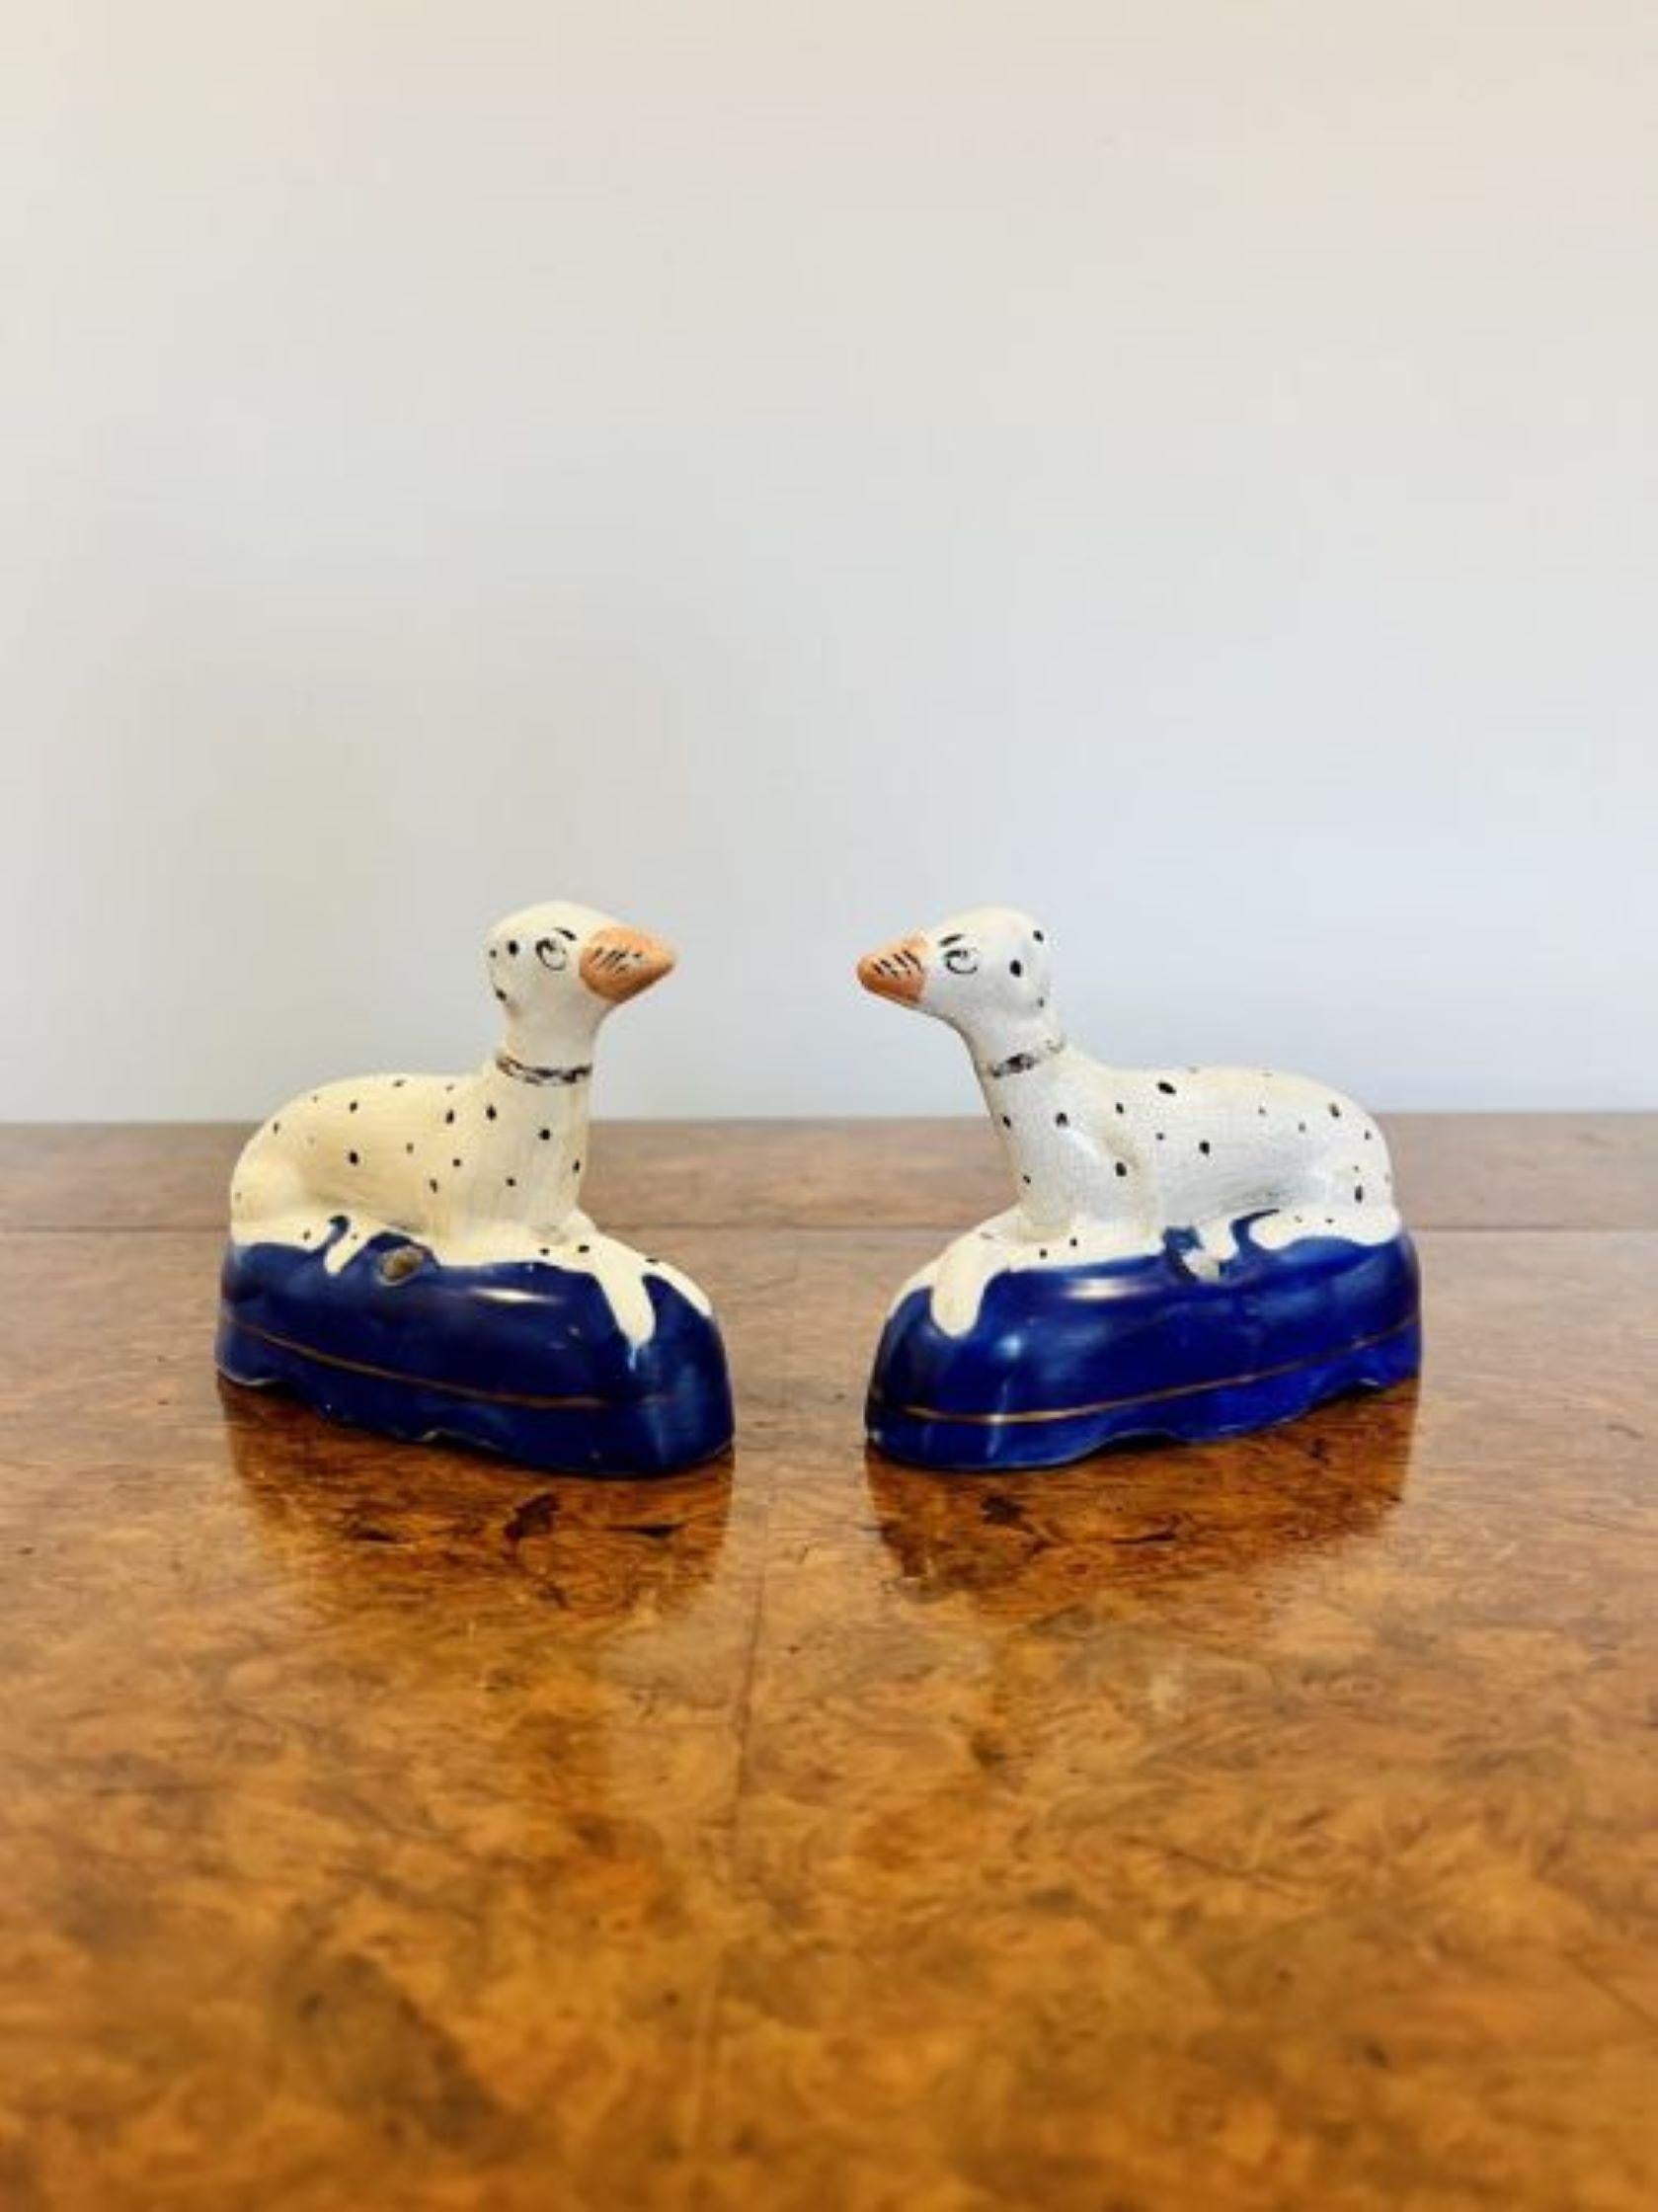 Quality pair of antique Victorian Staffordshire Dalmatian inkwells having a quality pair of Dalmatians laying down on a blue shaped base hand painted with white coats and black spots. 